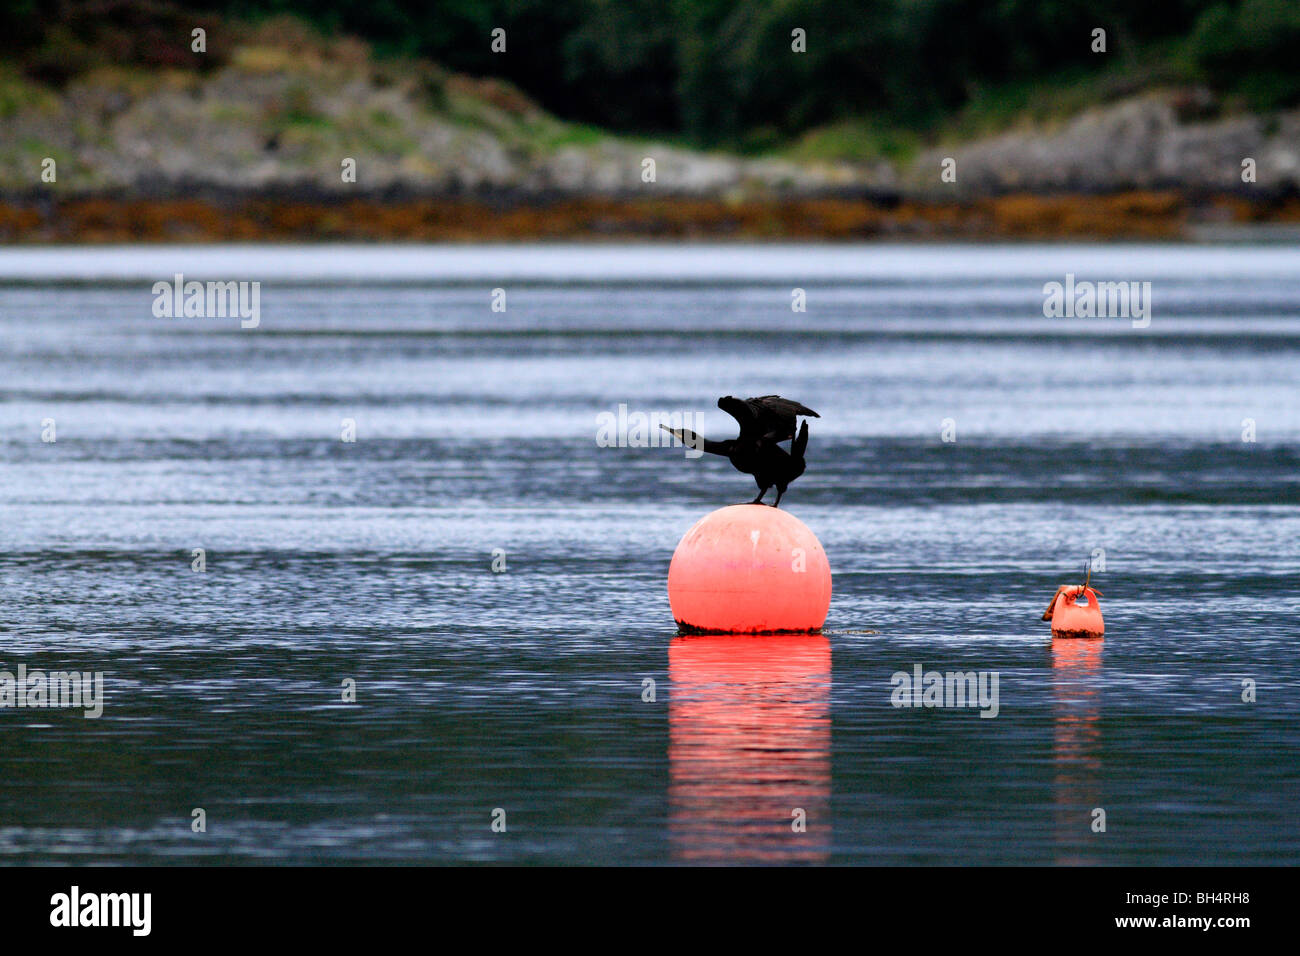 Cormorant (Phalacrocorax carbo) ready to jump into the water after resting on a buoy. Stock Photo